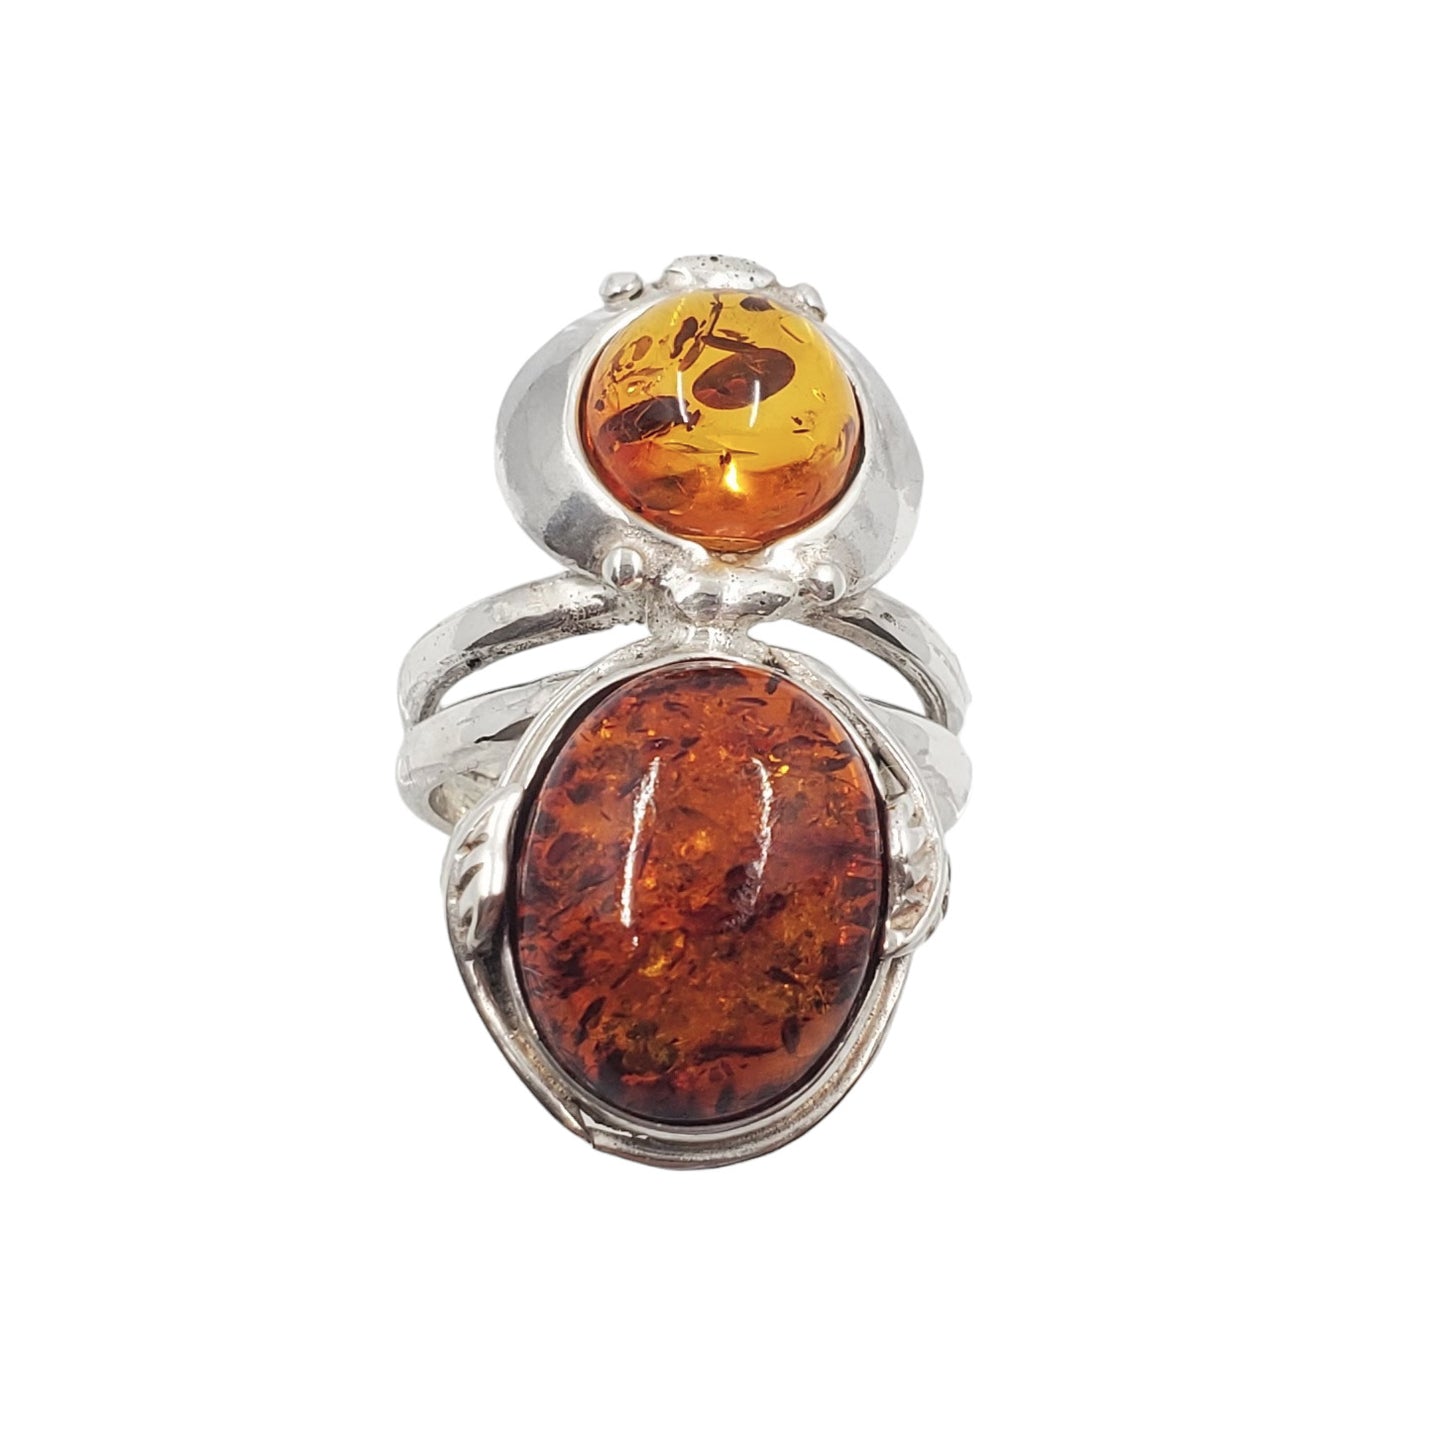 Vintage Sterling Silver Fashion Ring with Two Amber Stones